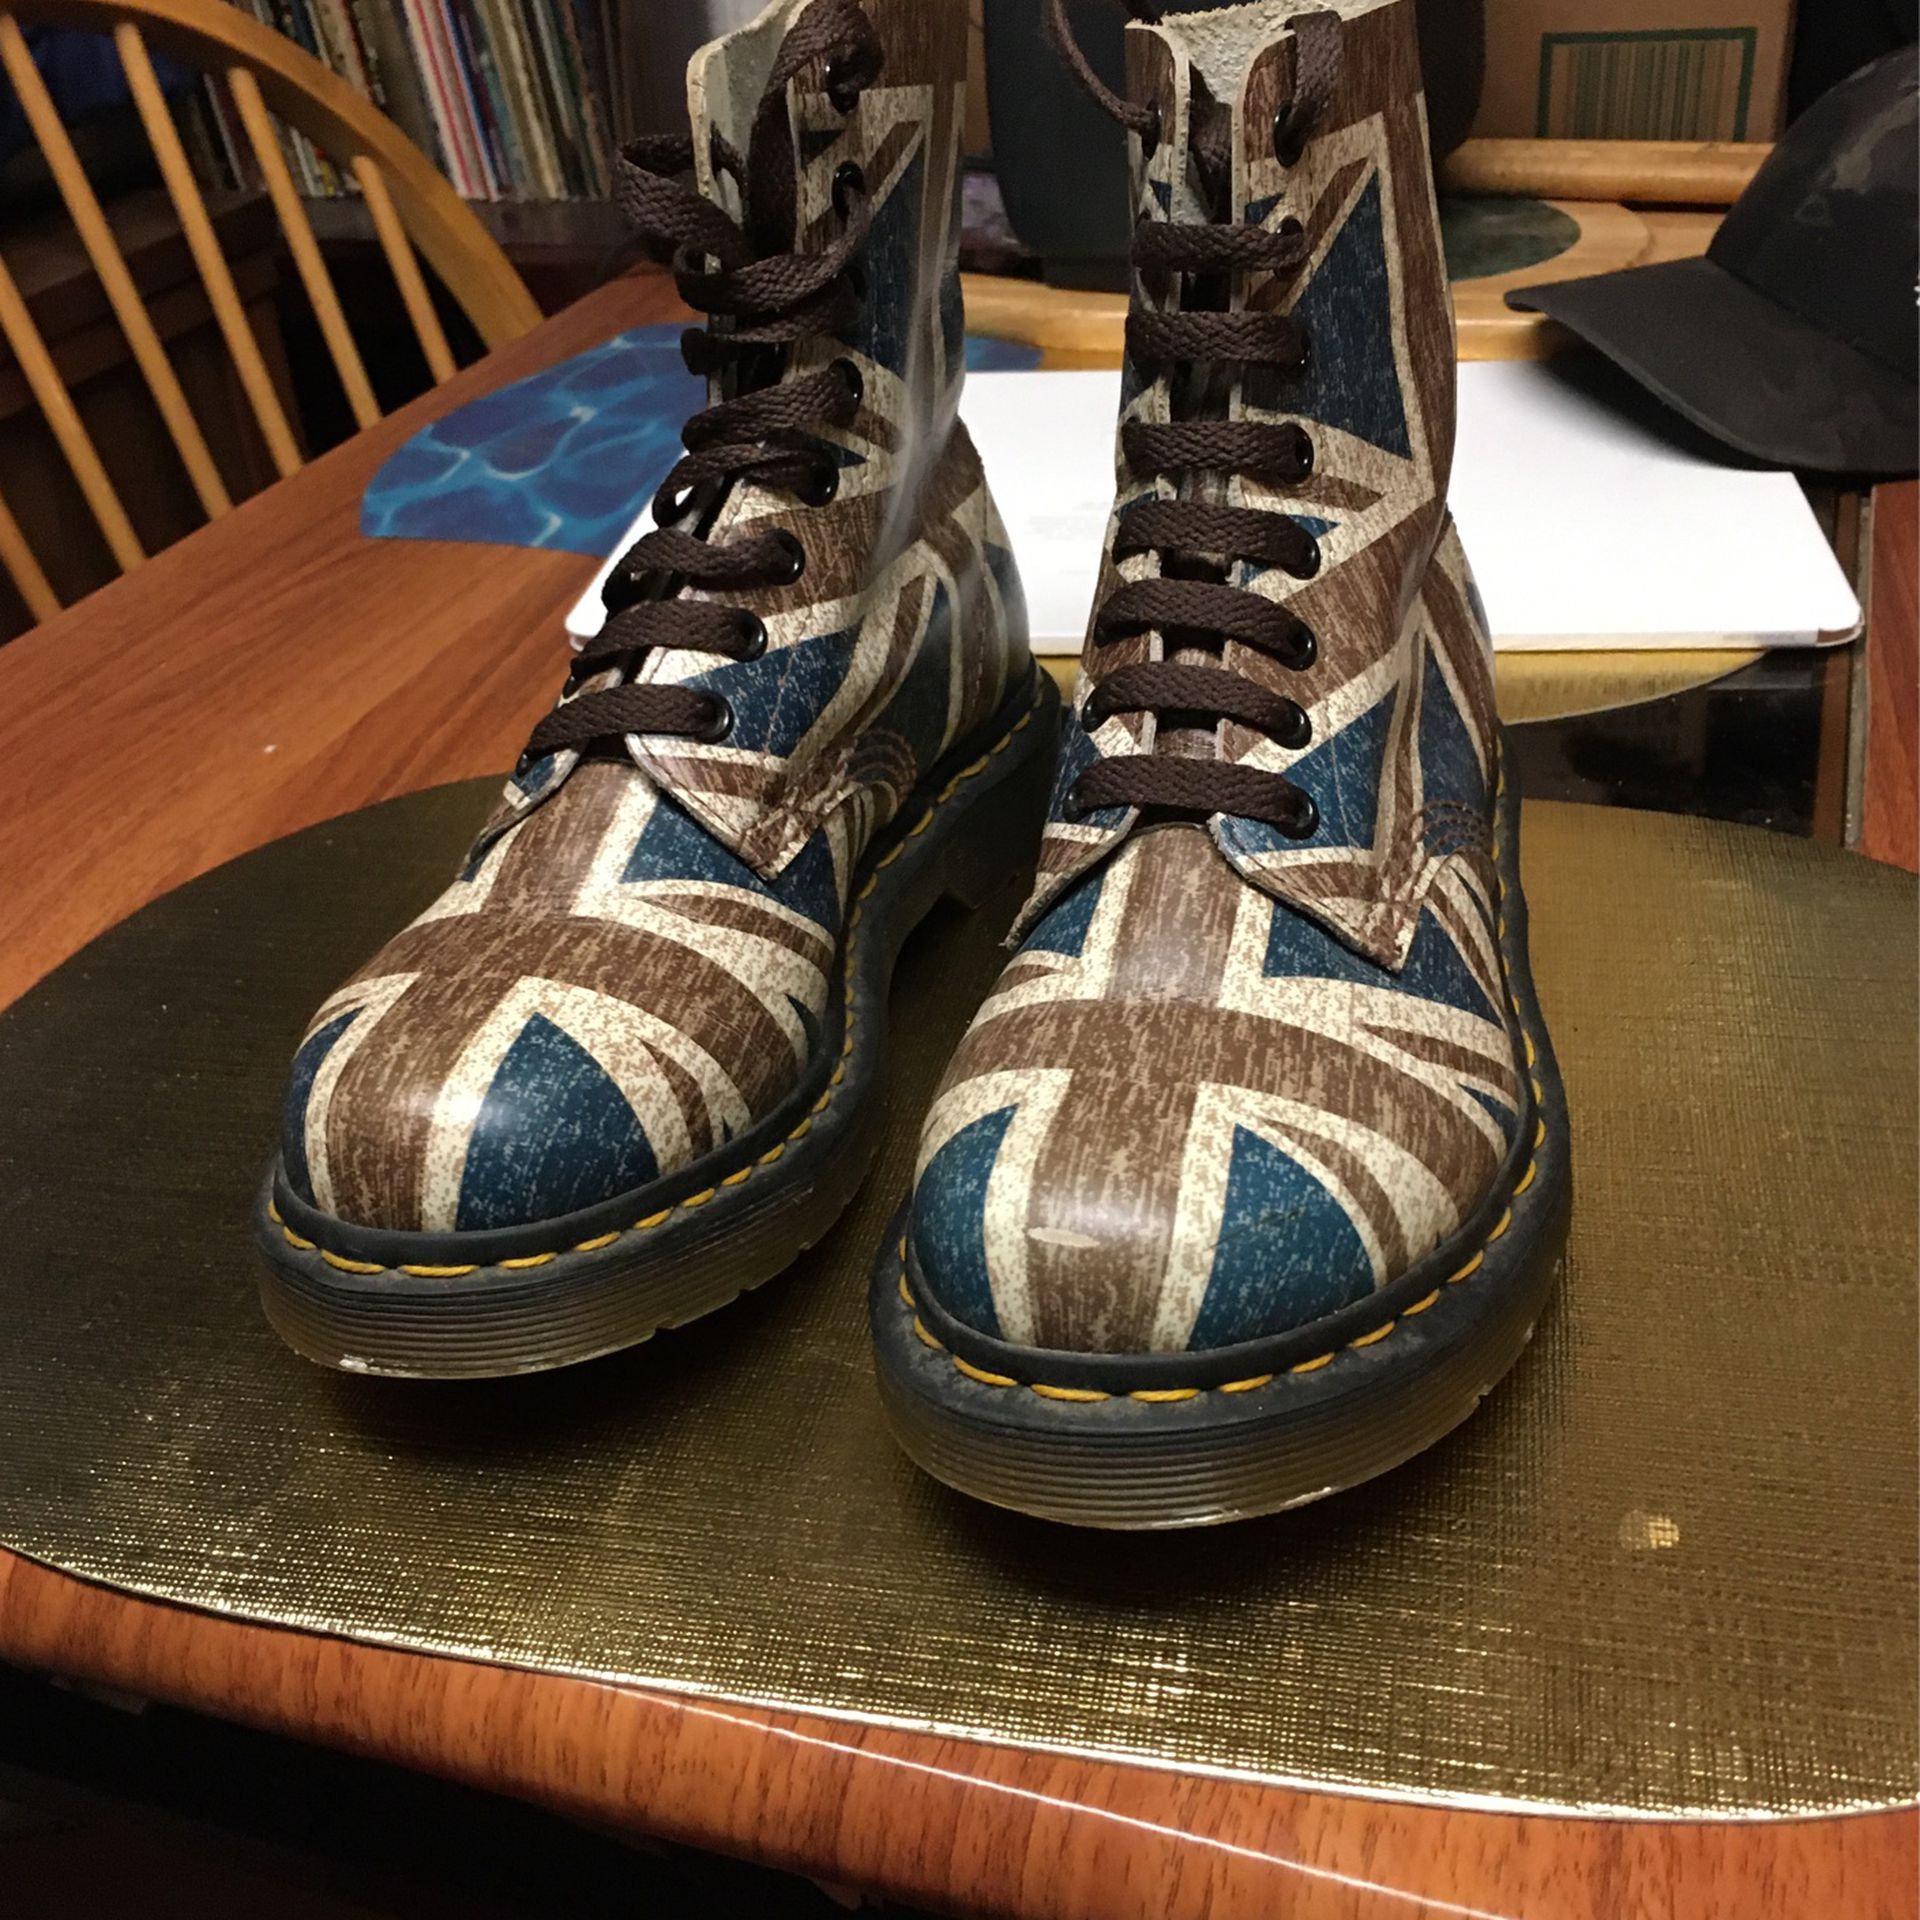 Girl Dr. Martens British flag Boots Size 7 Mint Condition .